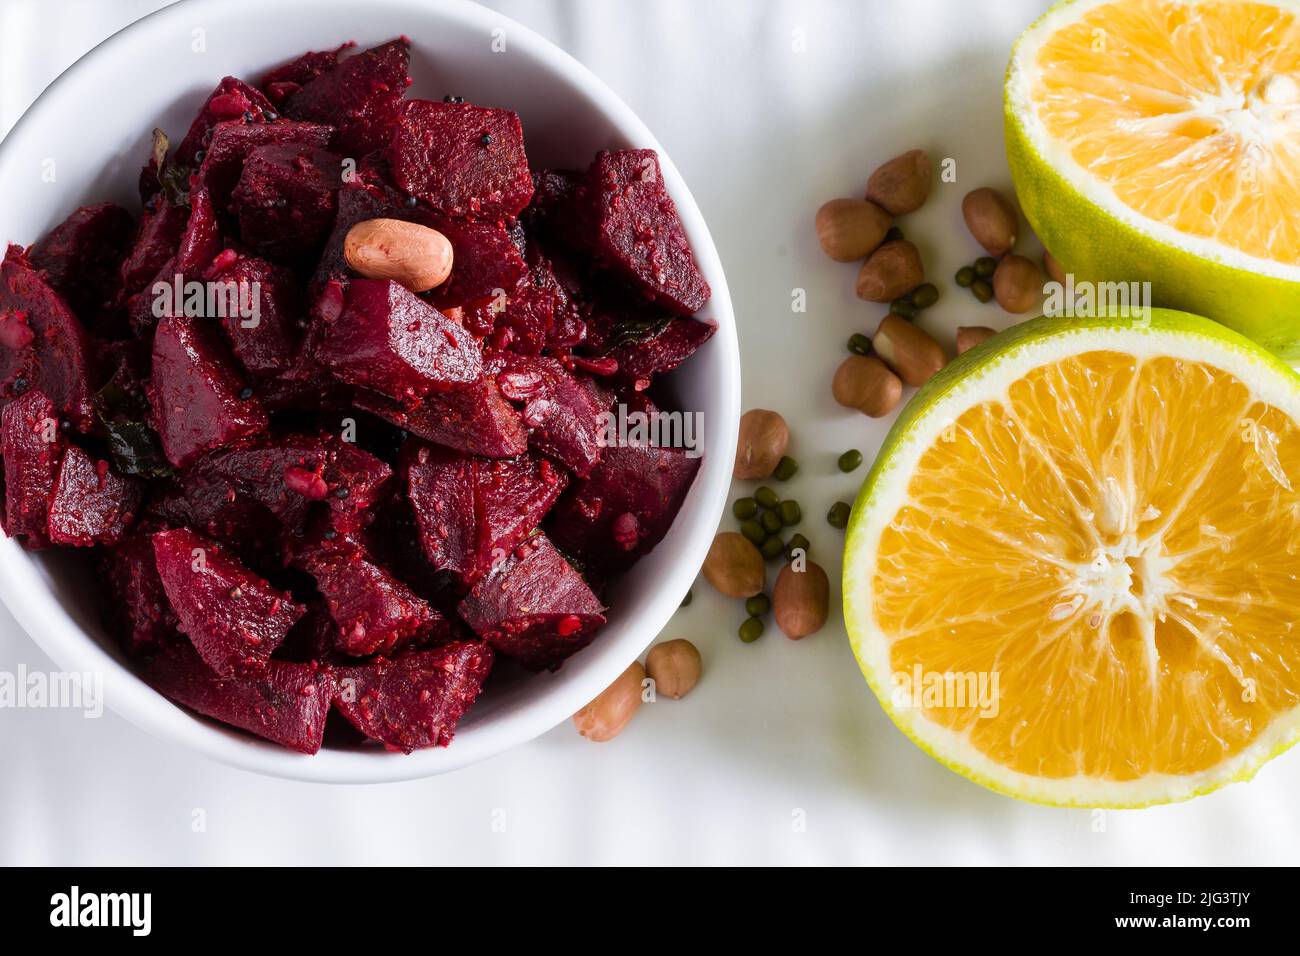 Selective focus on sauteed or Stir fry Beetroot vegetable,garnished with peanuts,mint,sweet lime.Healthy eating concept of South Indian side dish. Stock Photo